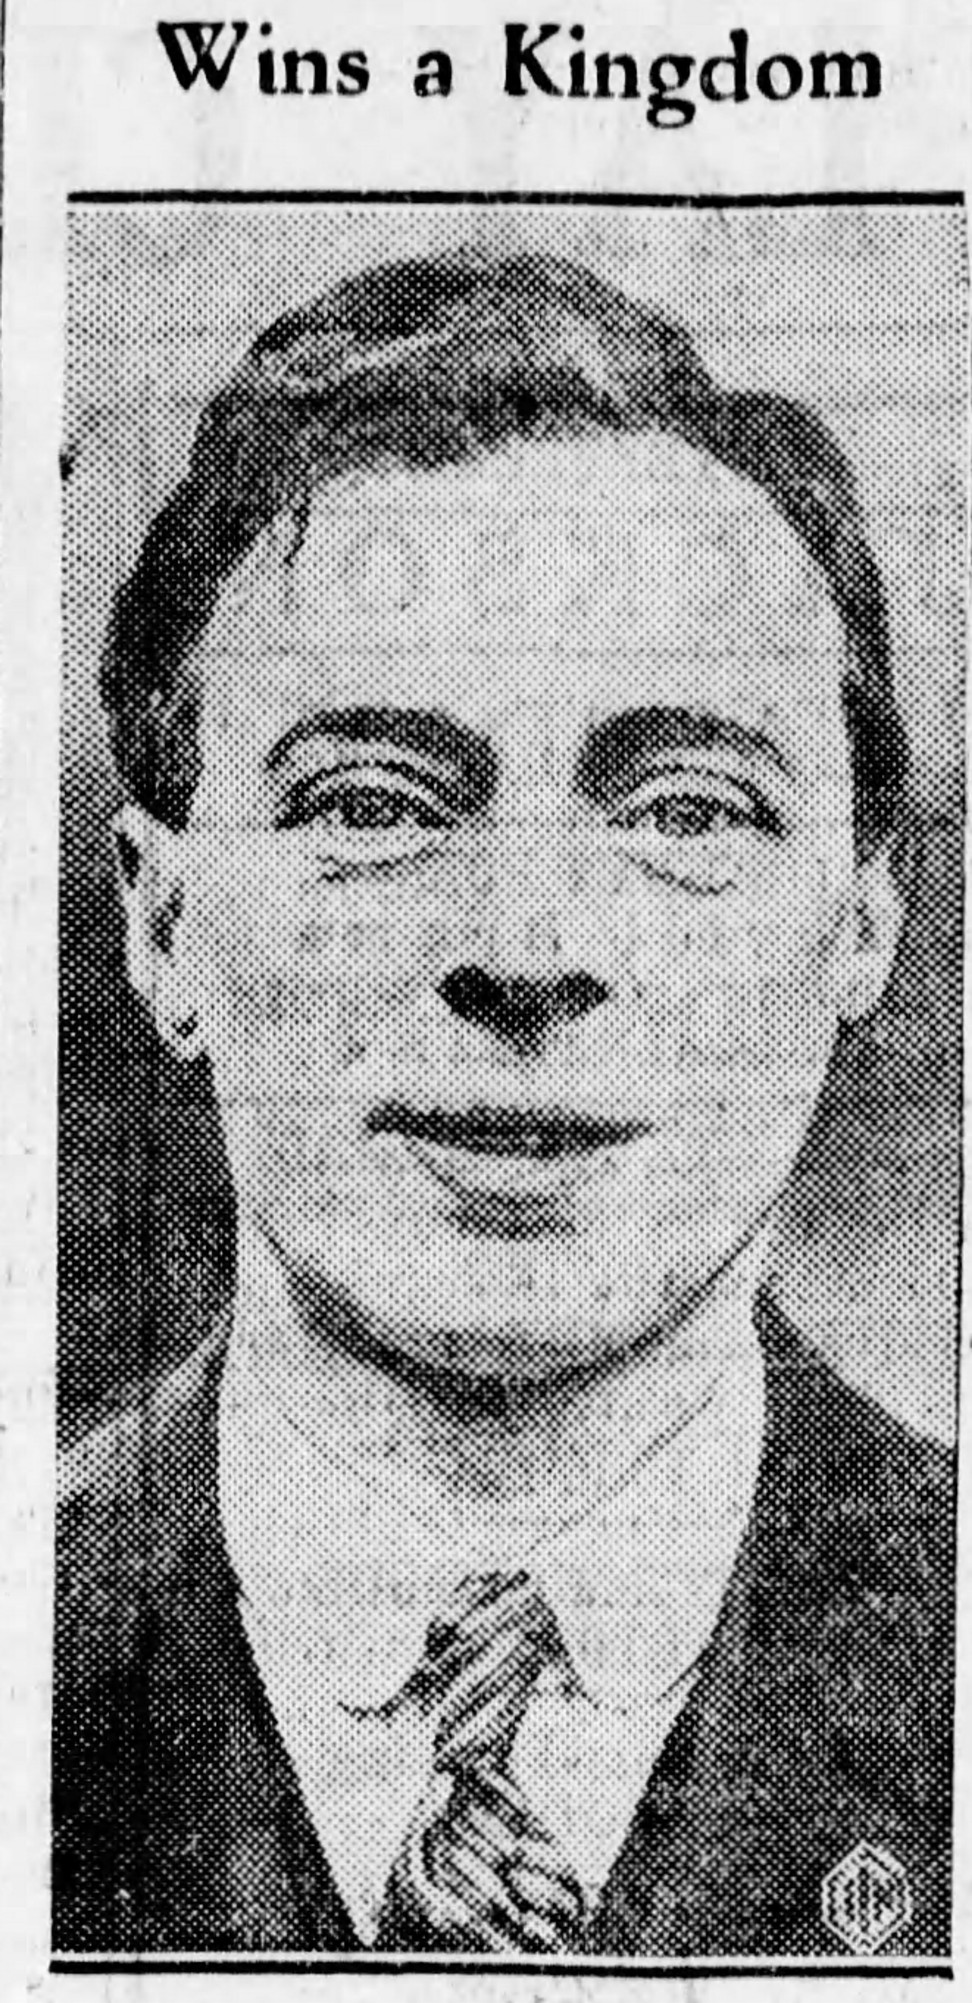 Sheldrake in an Evening Report newspaper article dated March 14, 1934.